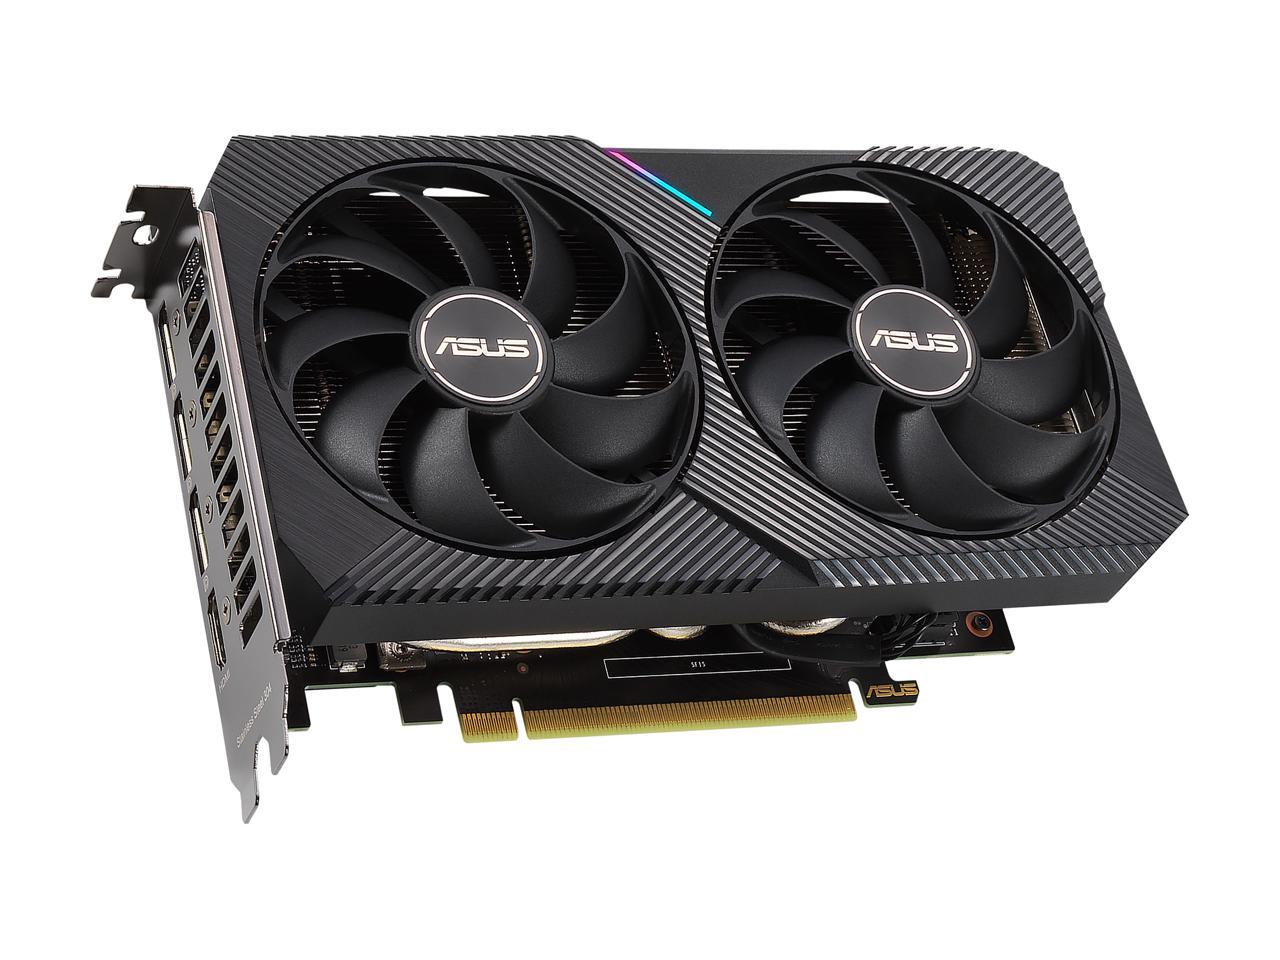 anspore afslappet Decode The best graphics cards prices for PC gaming in spring 2022 [Updated]